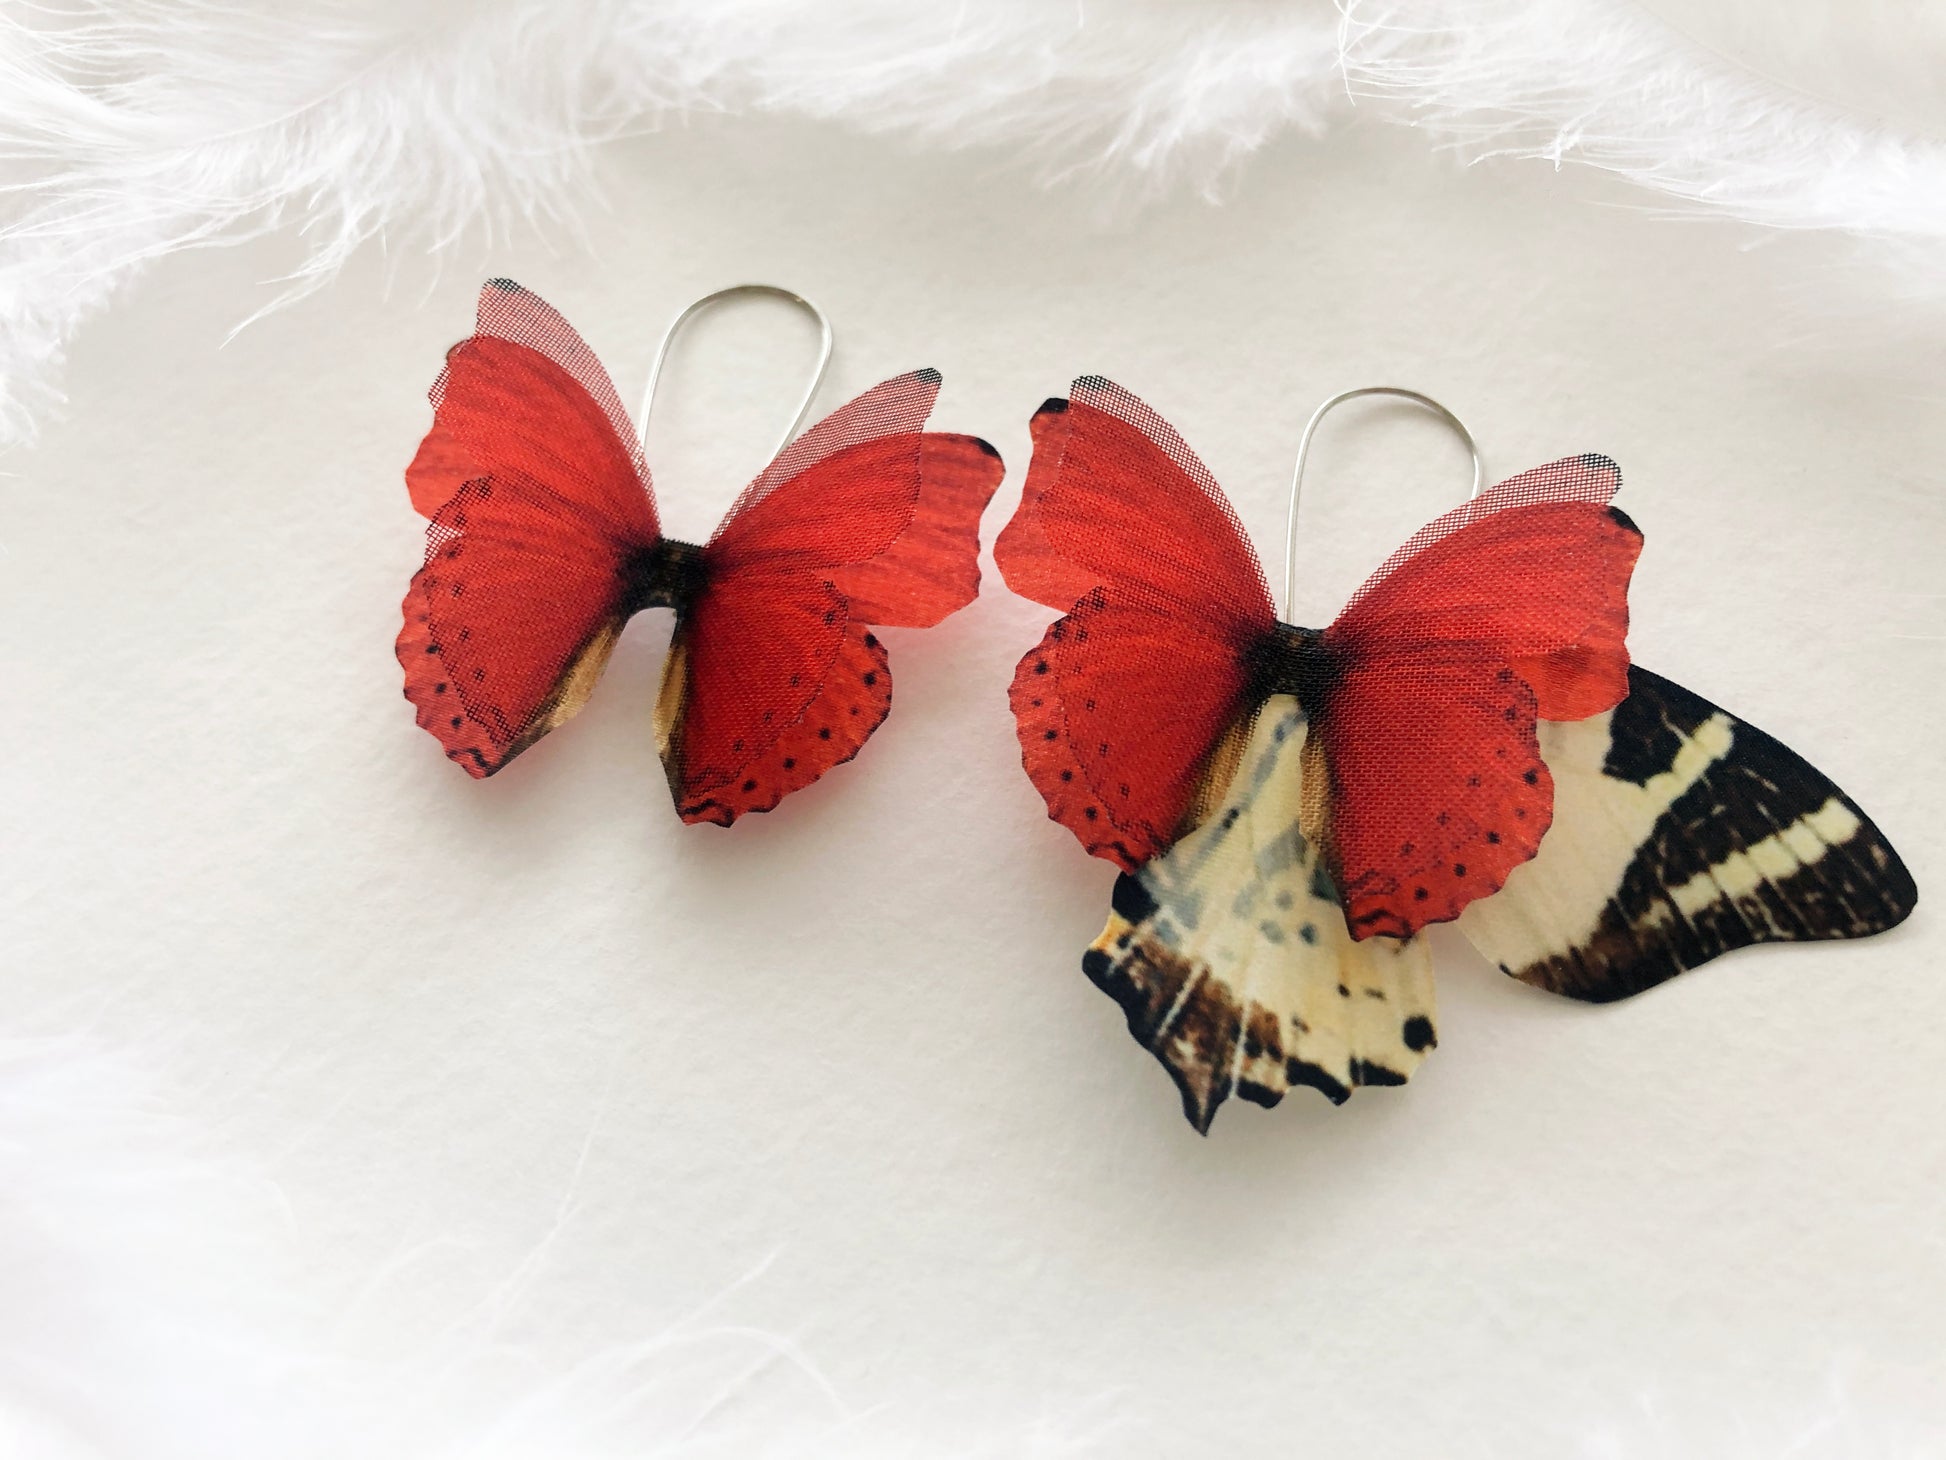 Whimsical Wing Earrings with Bright Red Butterflies